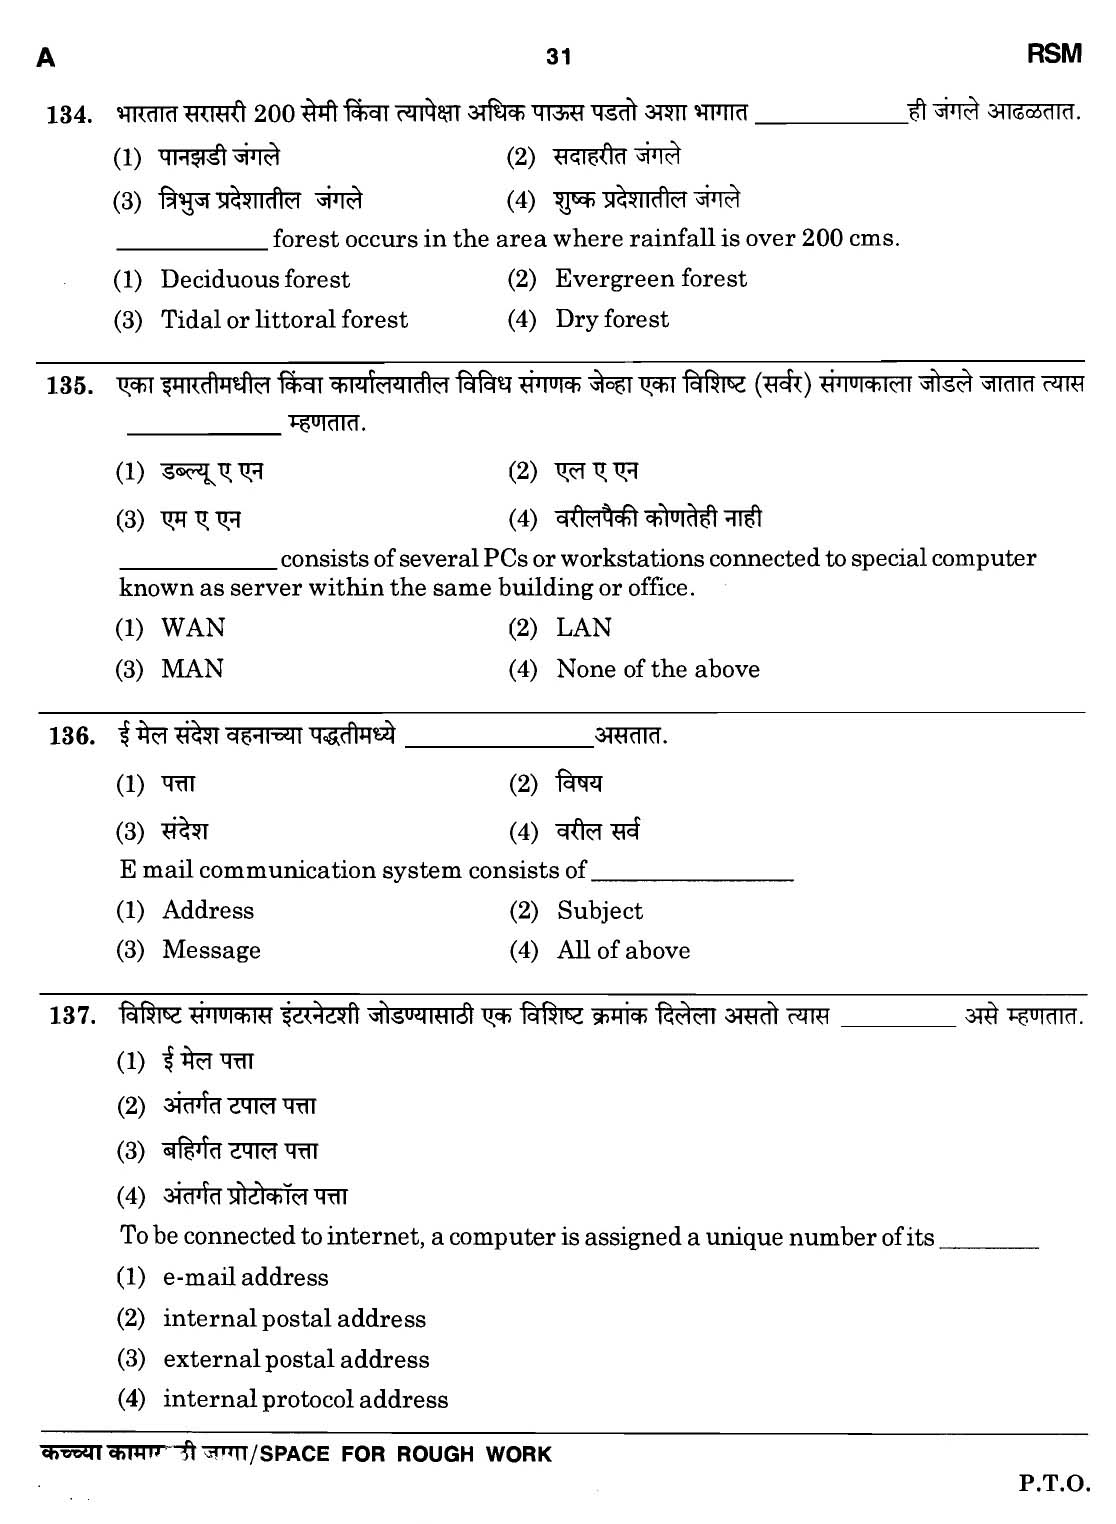 MPSC Agricultural Services Preliminary Exam 2011 Question Paper 30